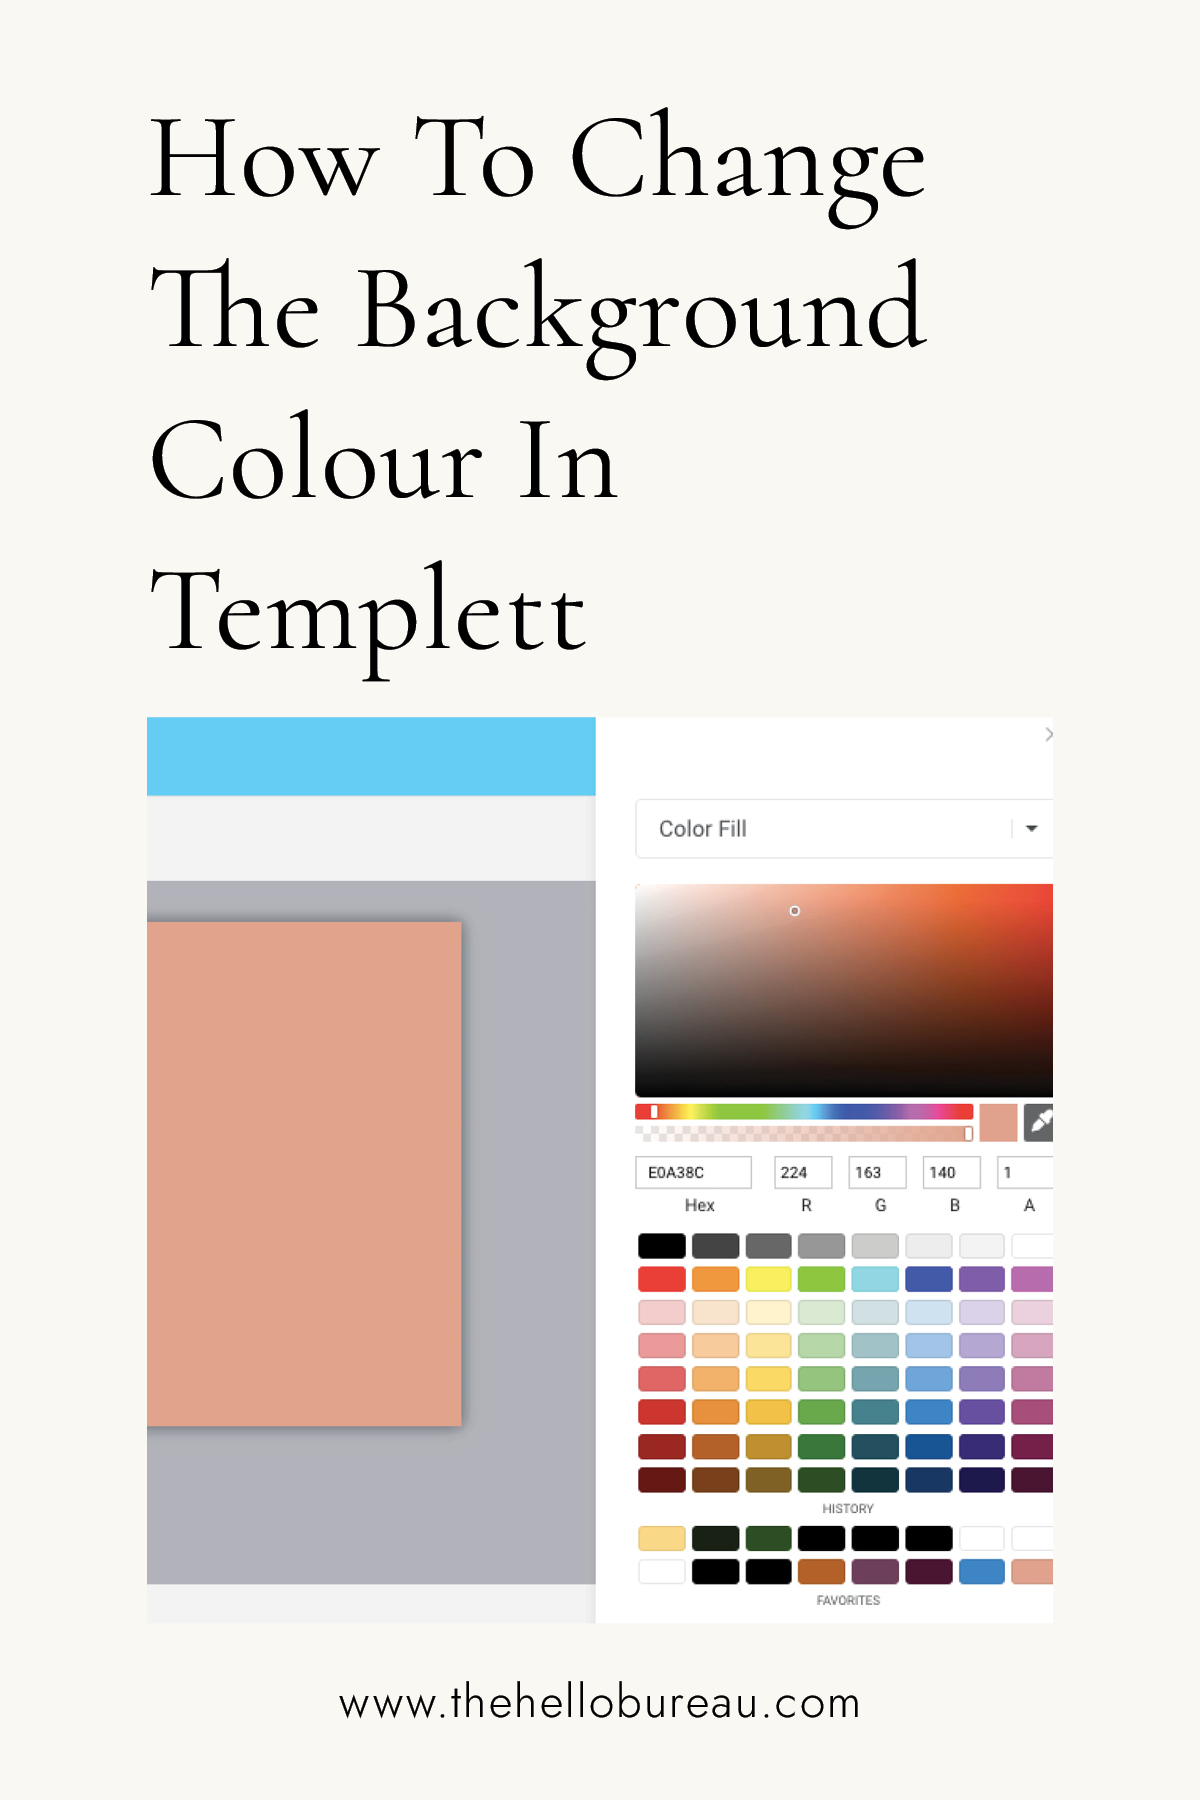 How To Change The Background Colour In Templett